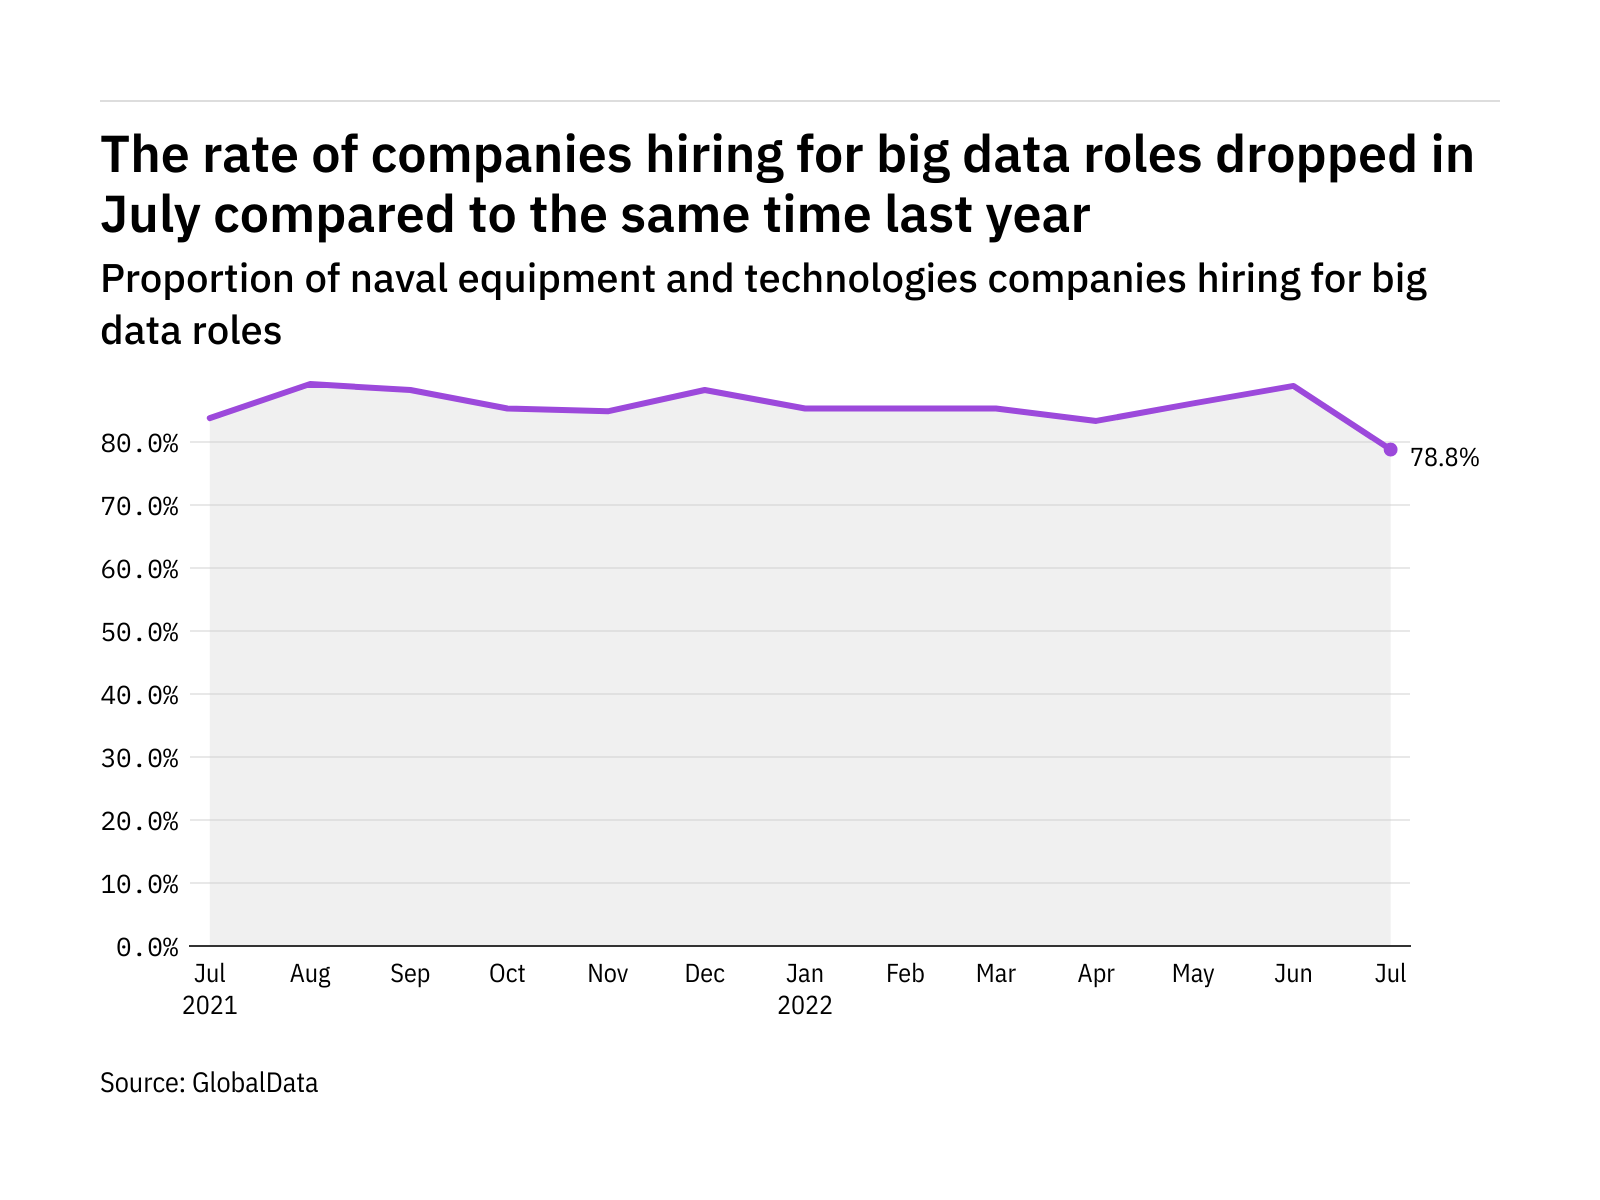 Big data hiring levels in the naval industry fell to a year-low in July 2022